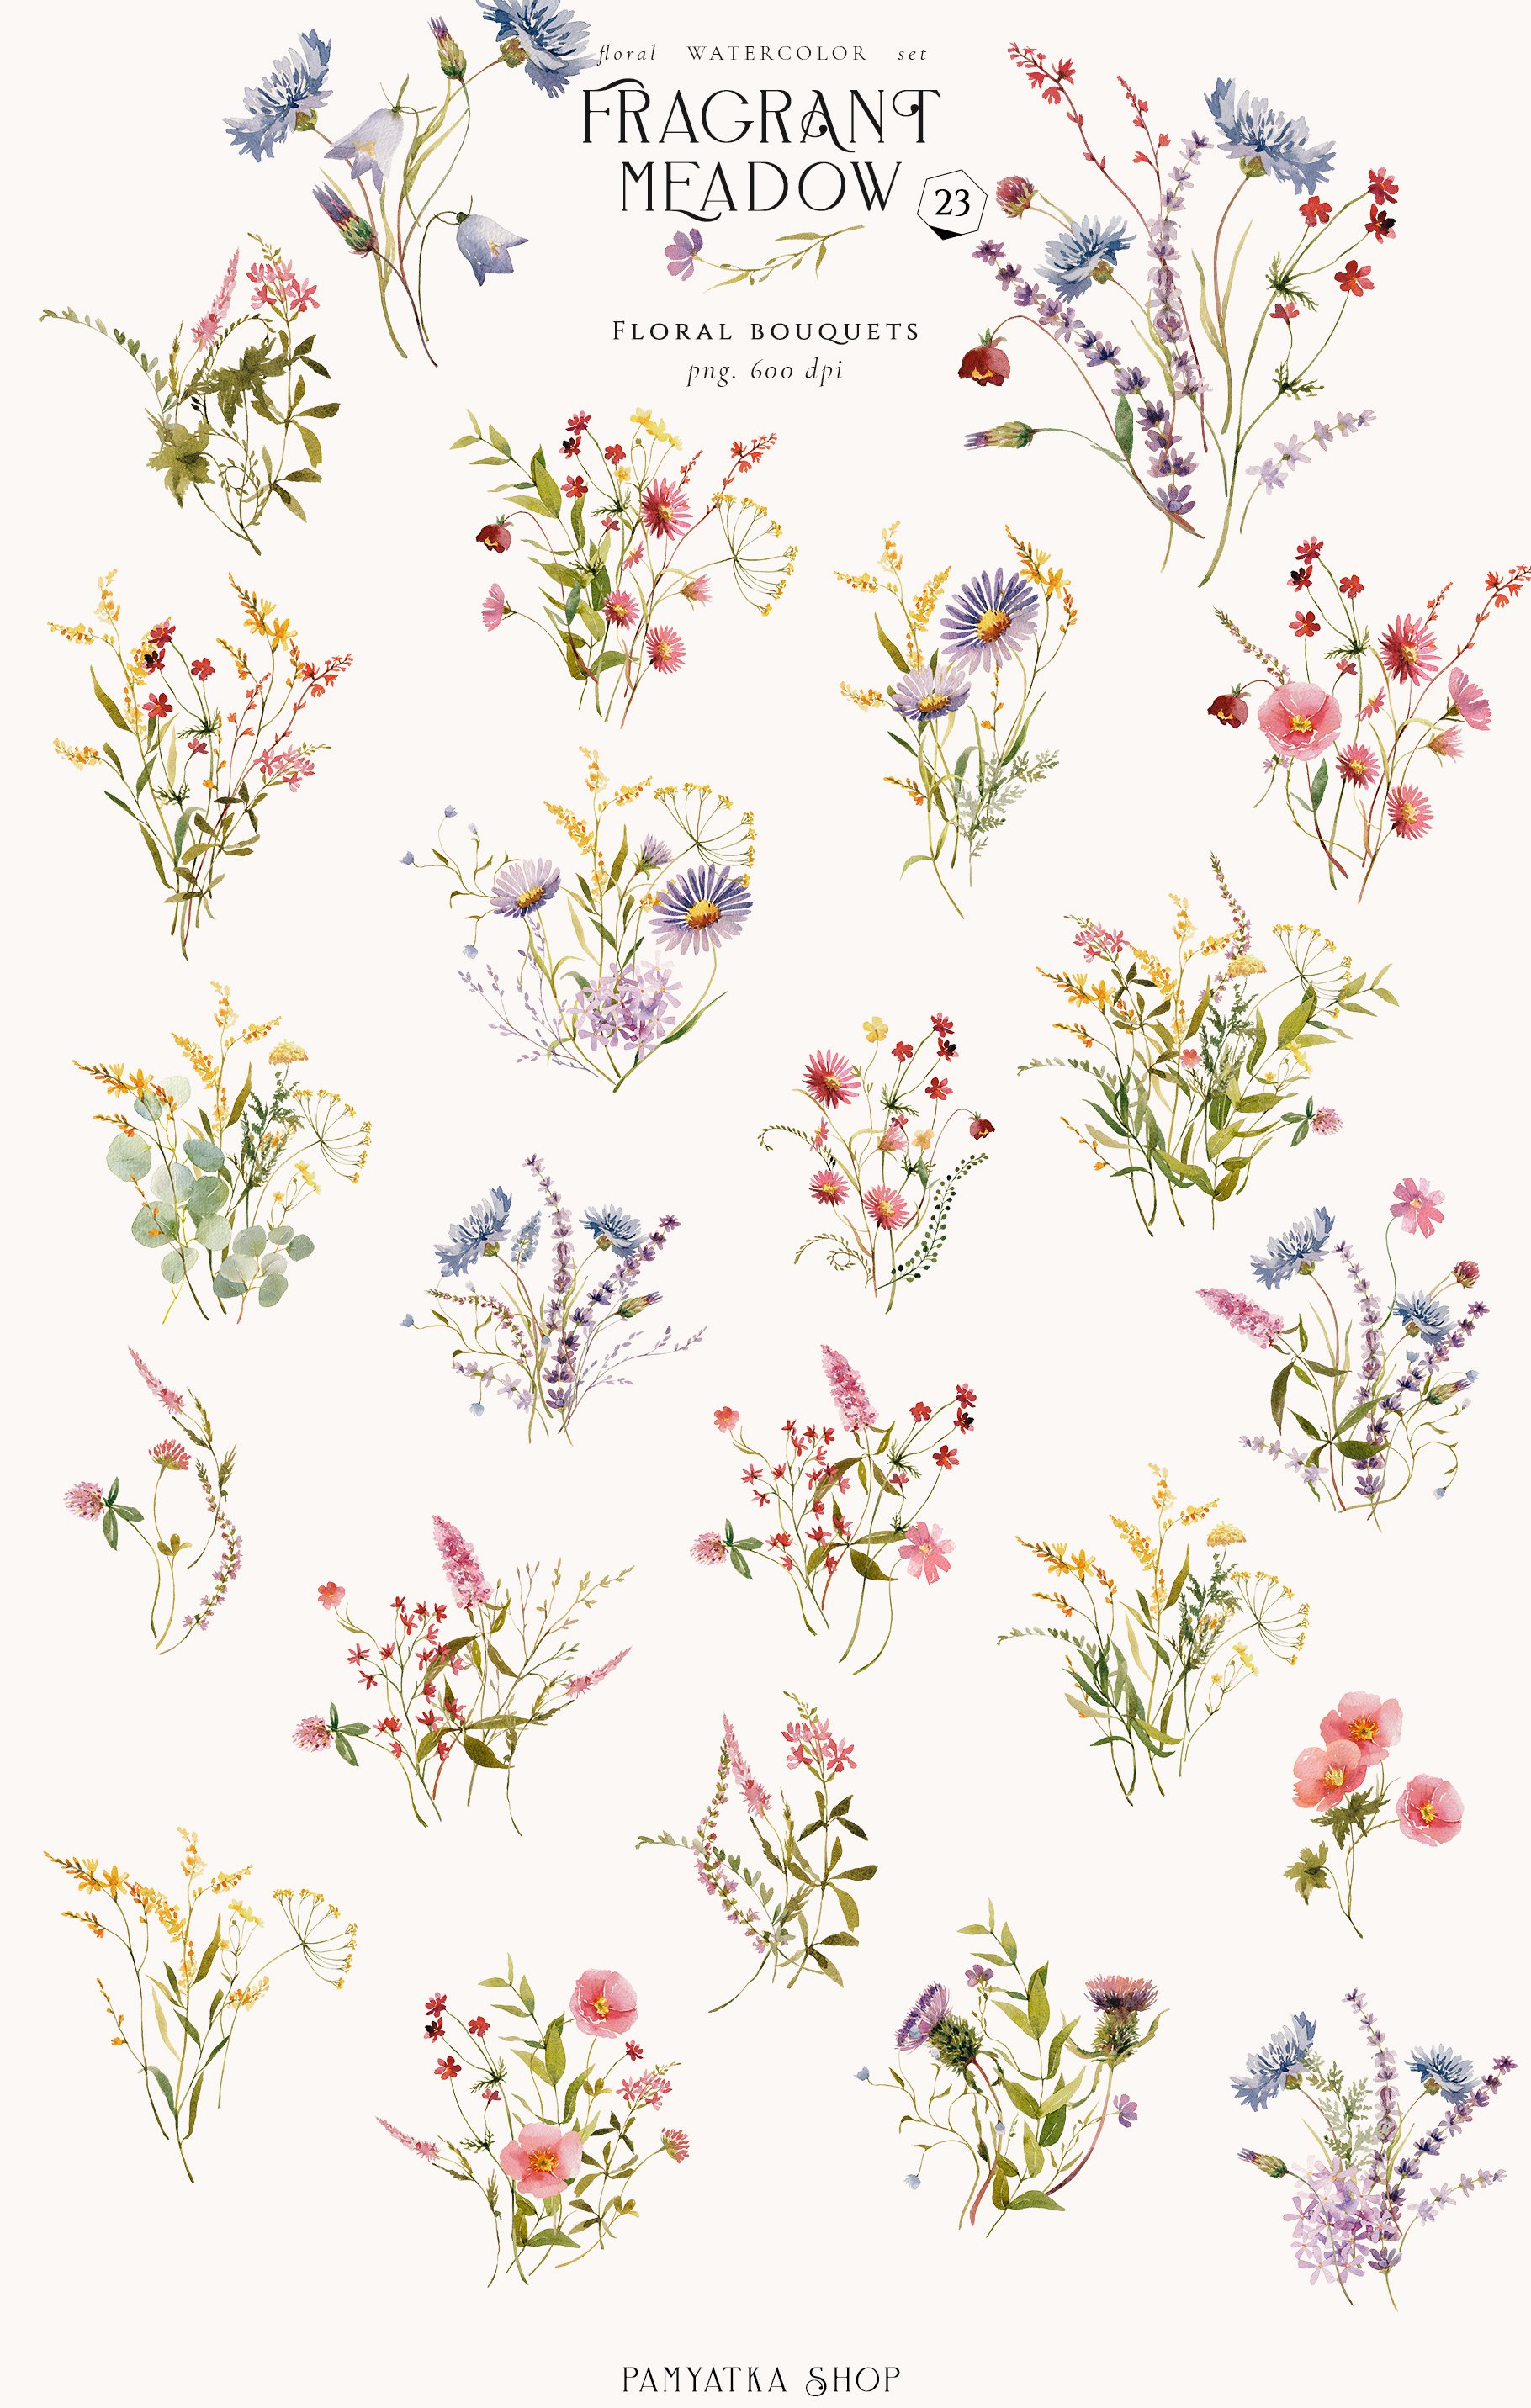 Fragrant Meadow - watercolor flowers preview image.